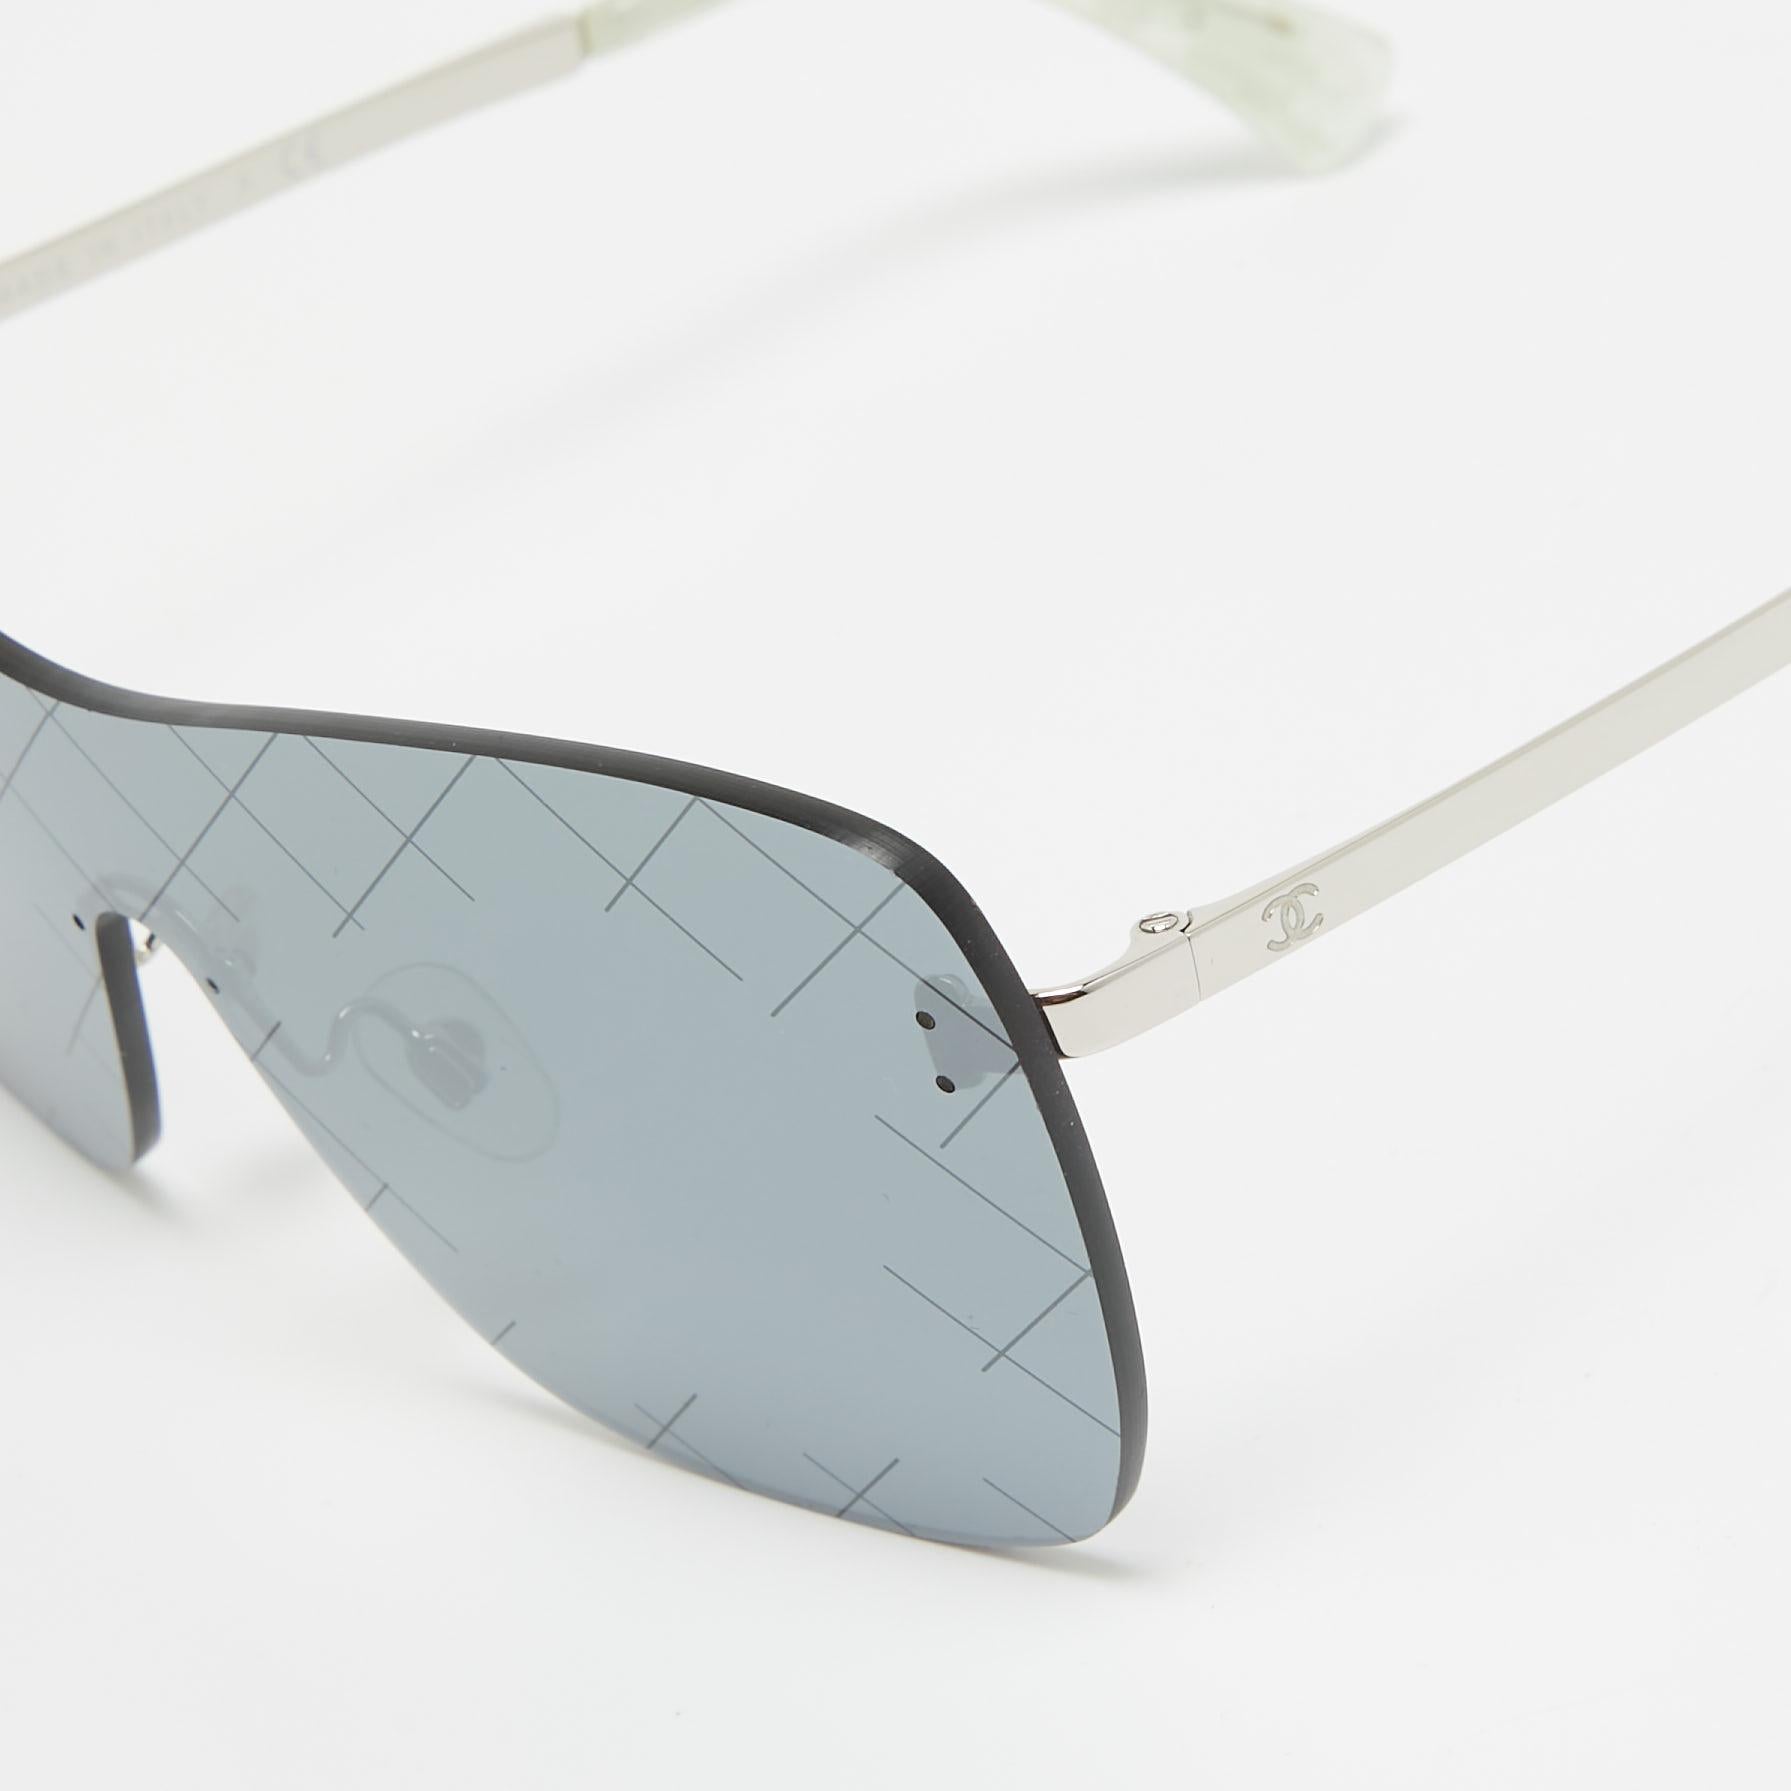 We see the detailing on this exquisite pair of designer sunglasses made from fine materials. The sunglasses are luxe in appeal and practical in usage.

Includes: Original Case

